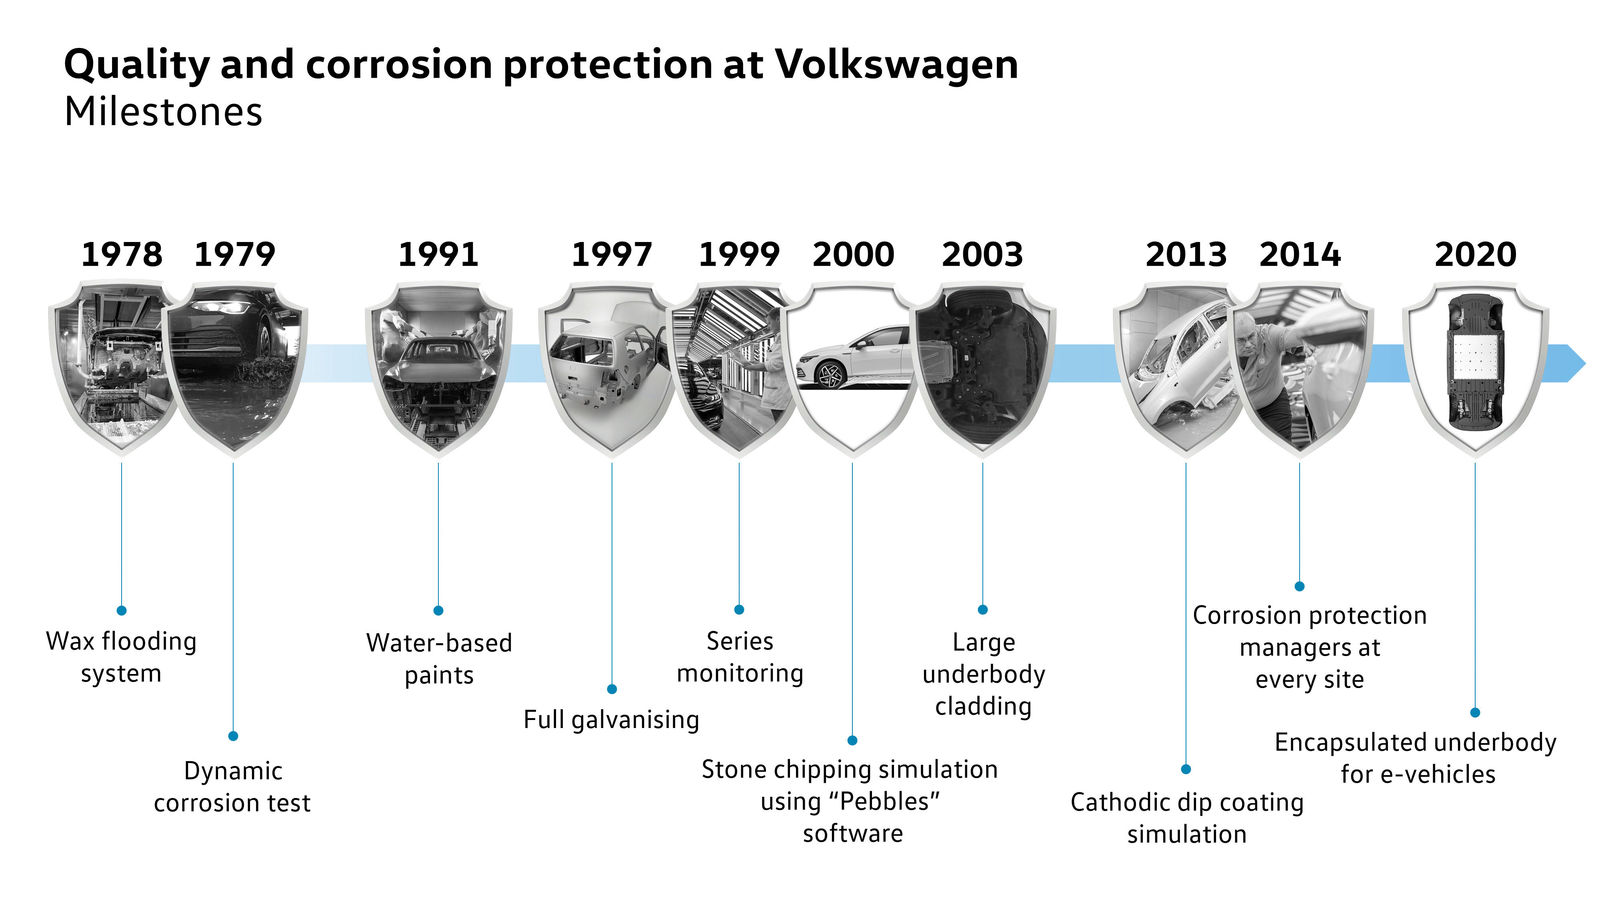 Corrosion protection at Volkswagen: Twelve years in “fast forward” mode